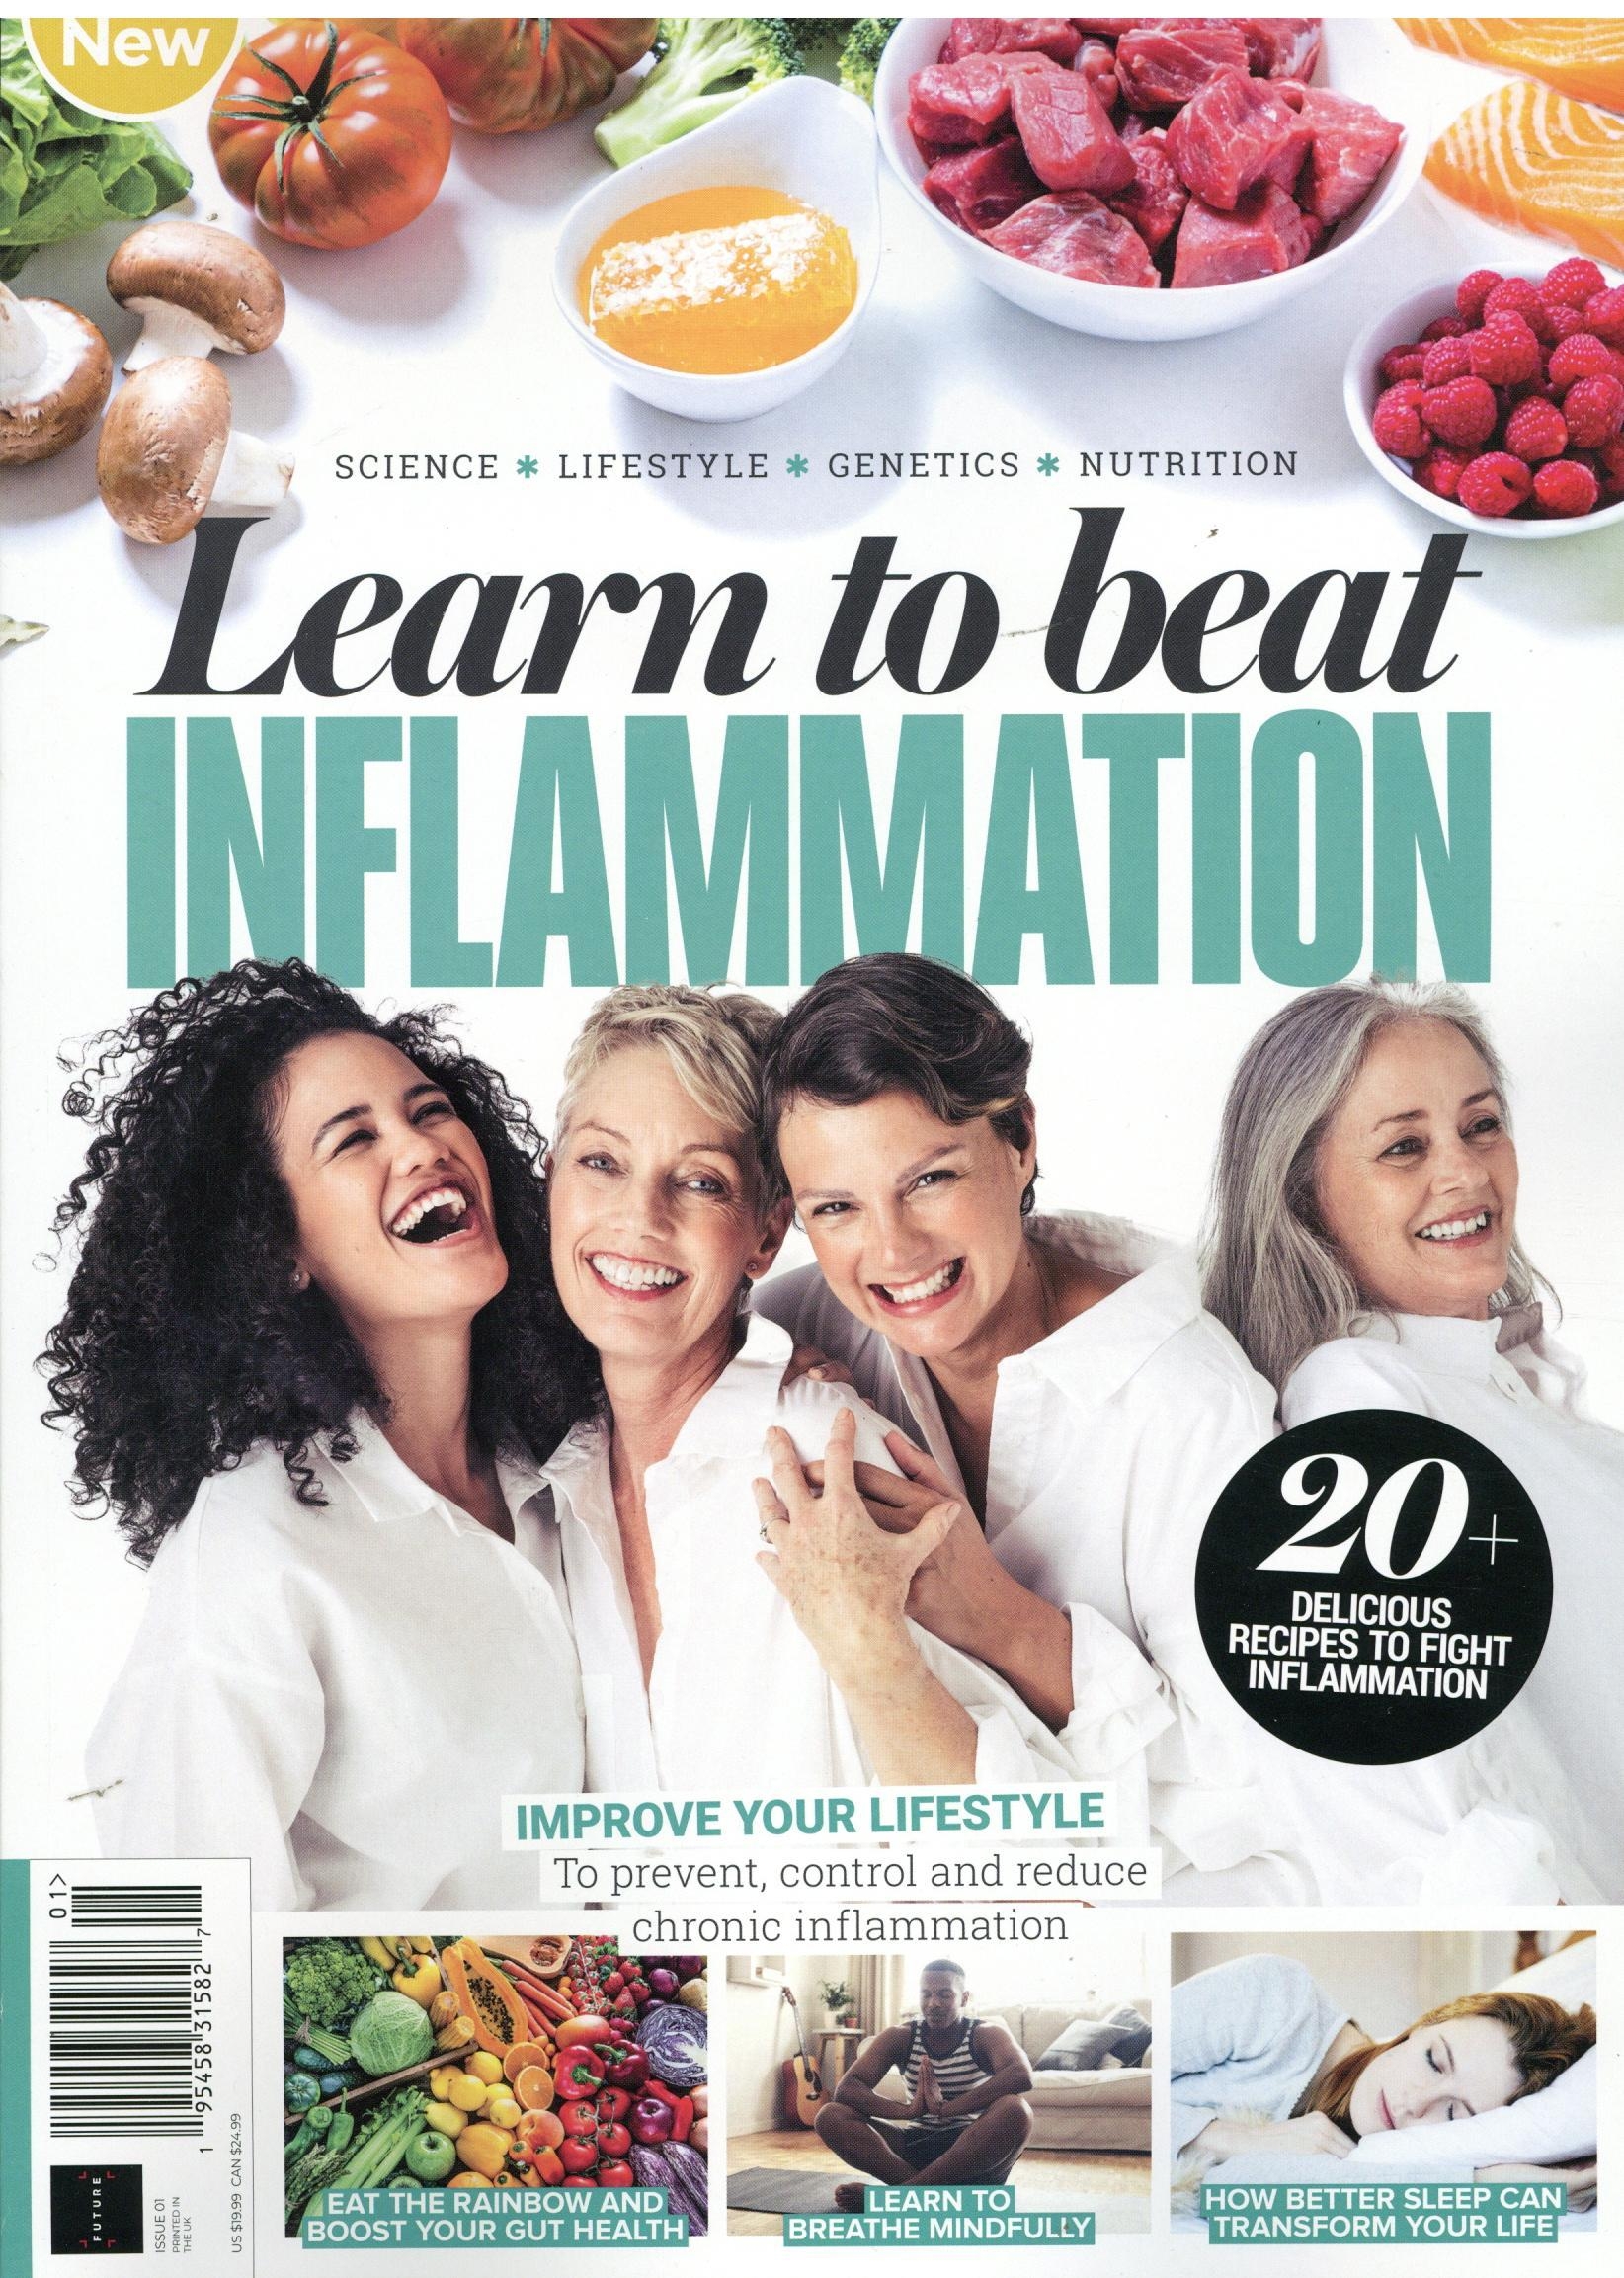 Learn to beat inflamma